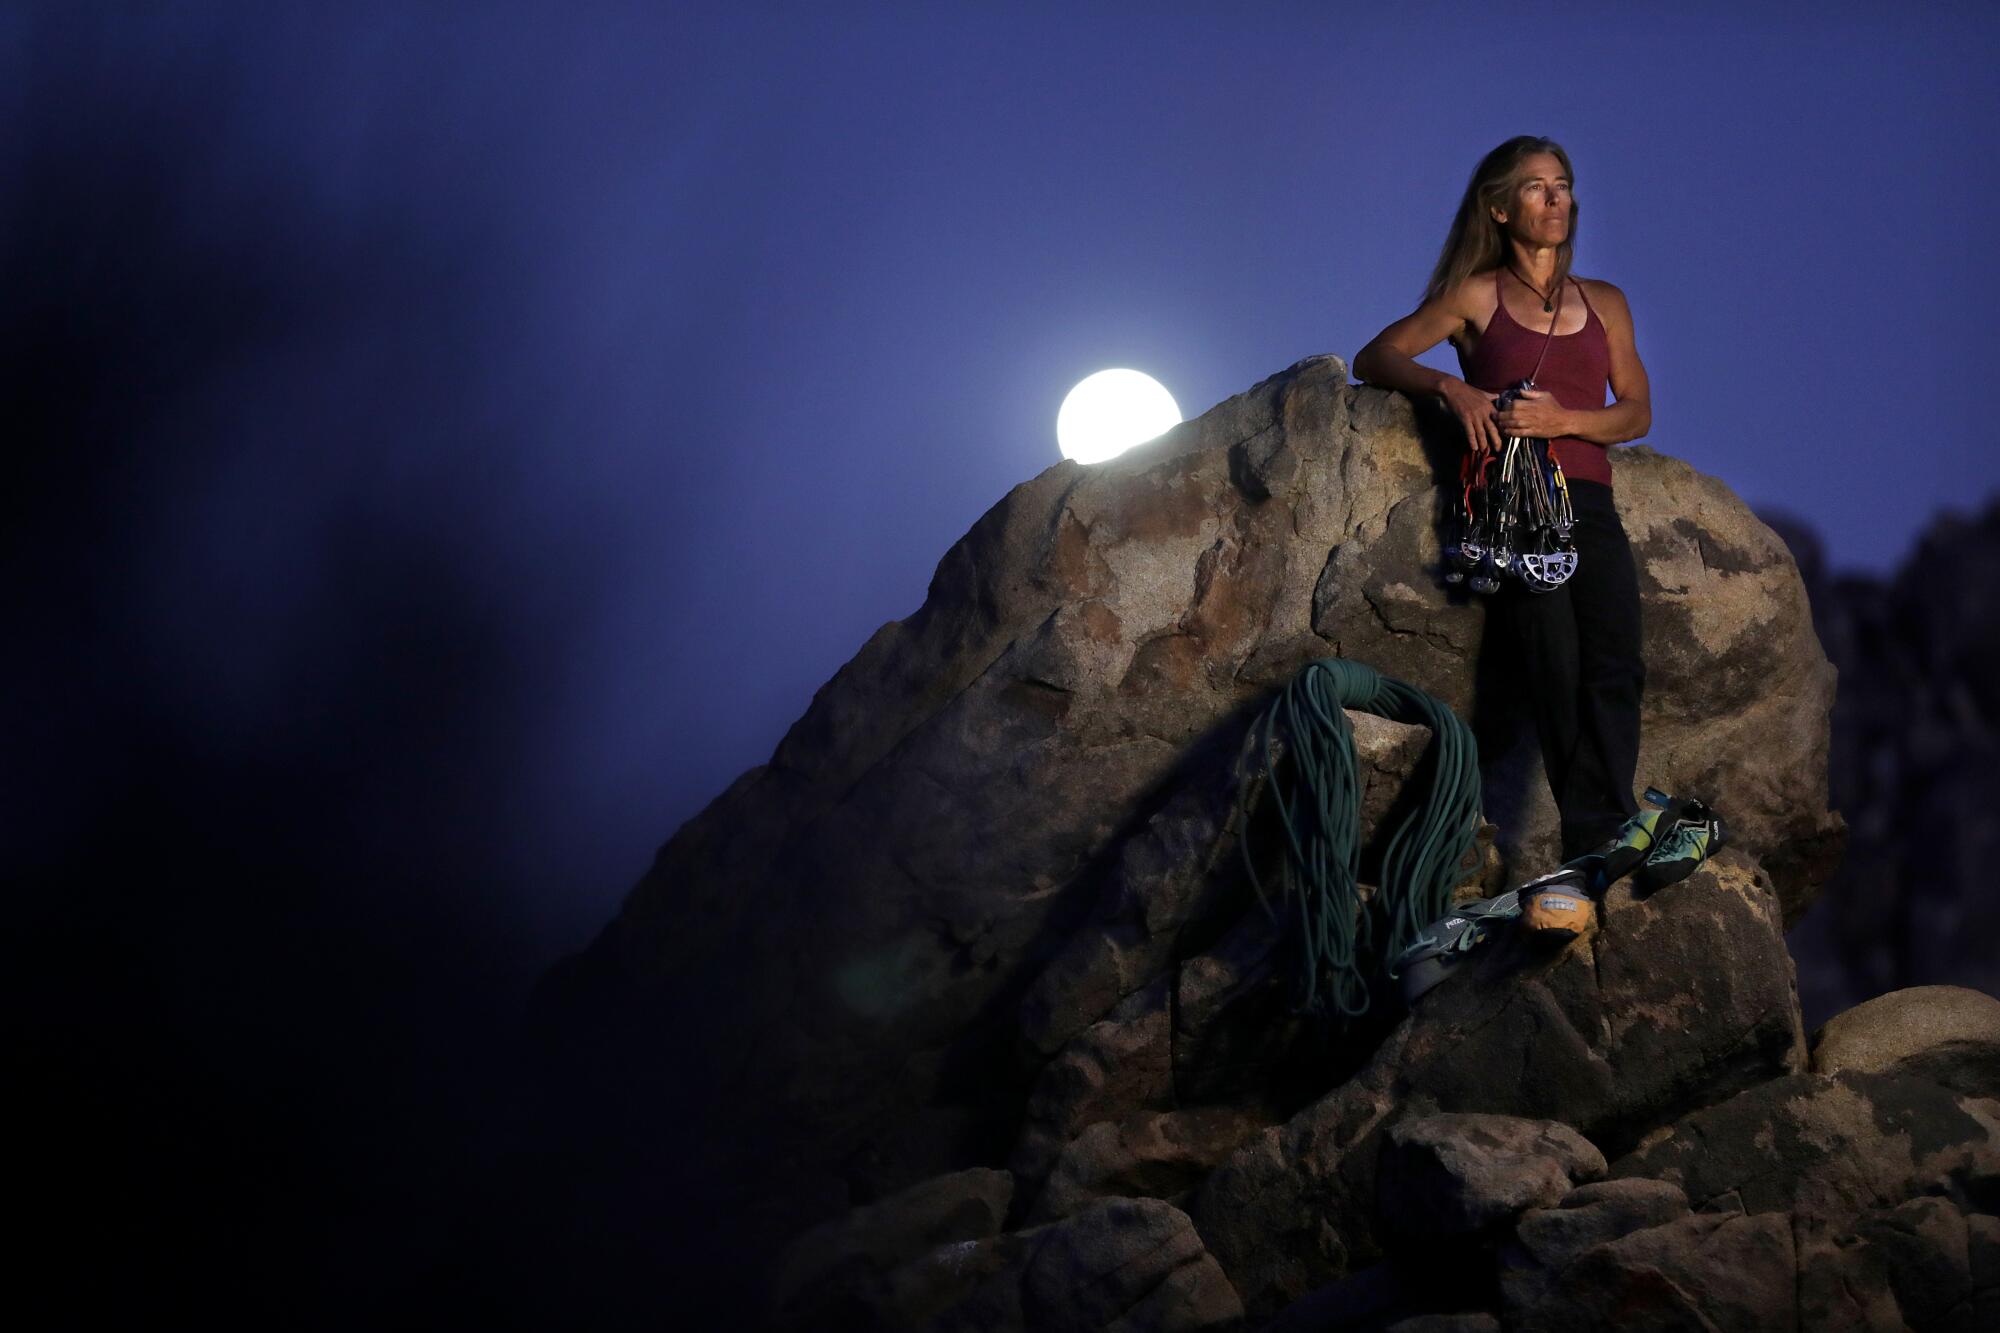 Lynn Hill has long been an advocate for gender equality in sports, seen here photographed in Joshua Tree, Ca.